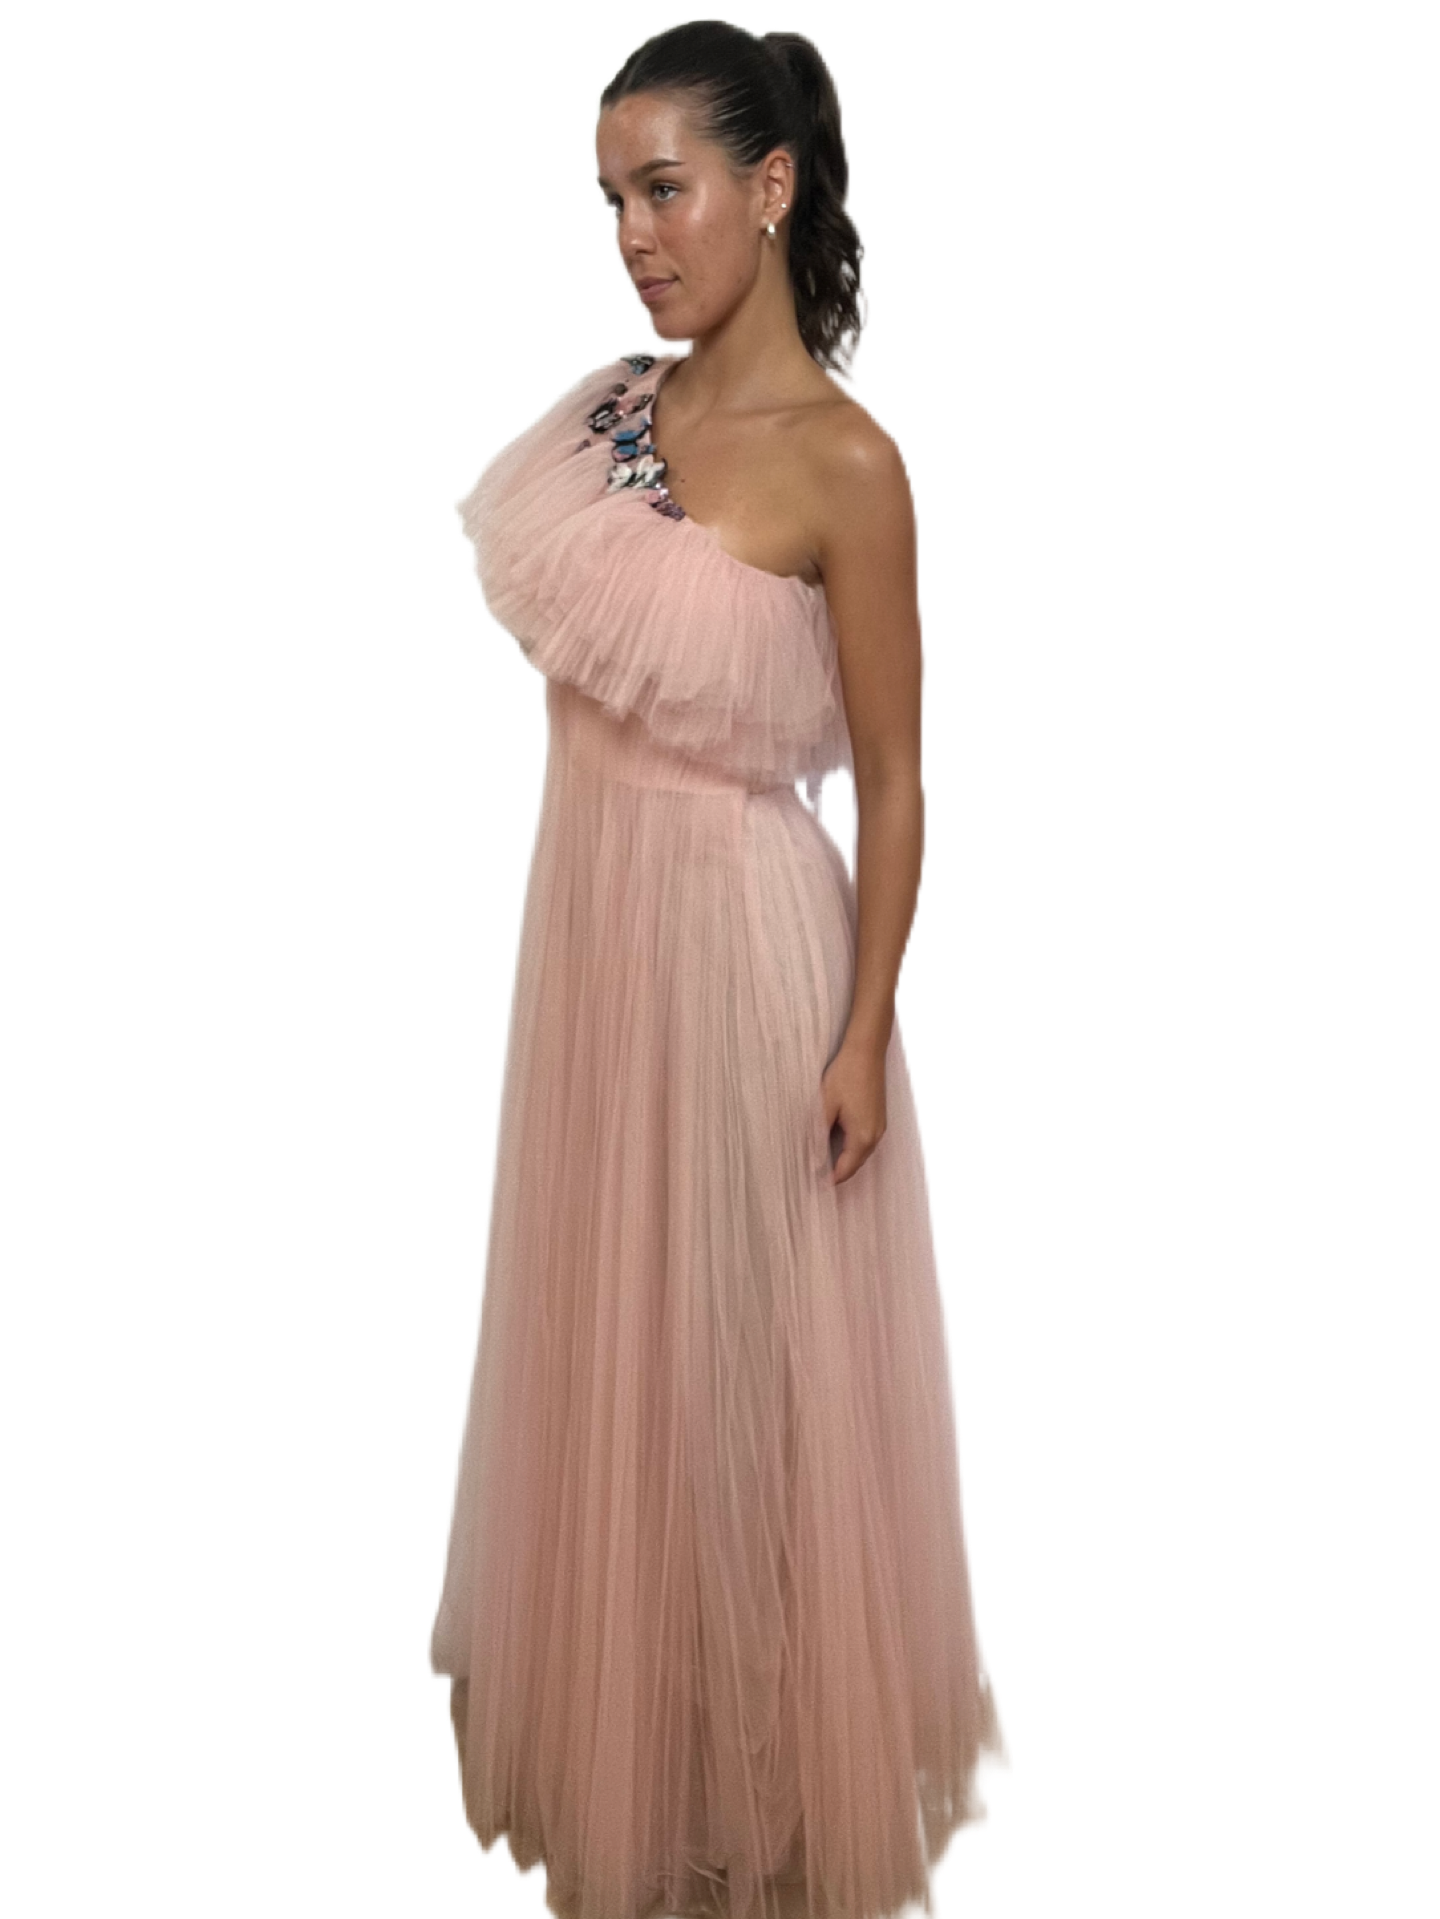 Valentino Light Pink Tulle Dress with Butterfly Details. Size: 40